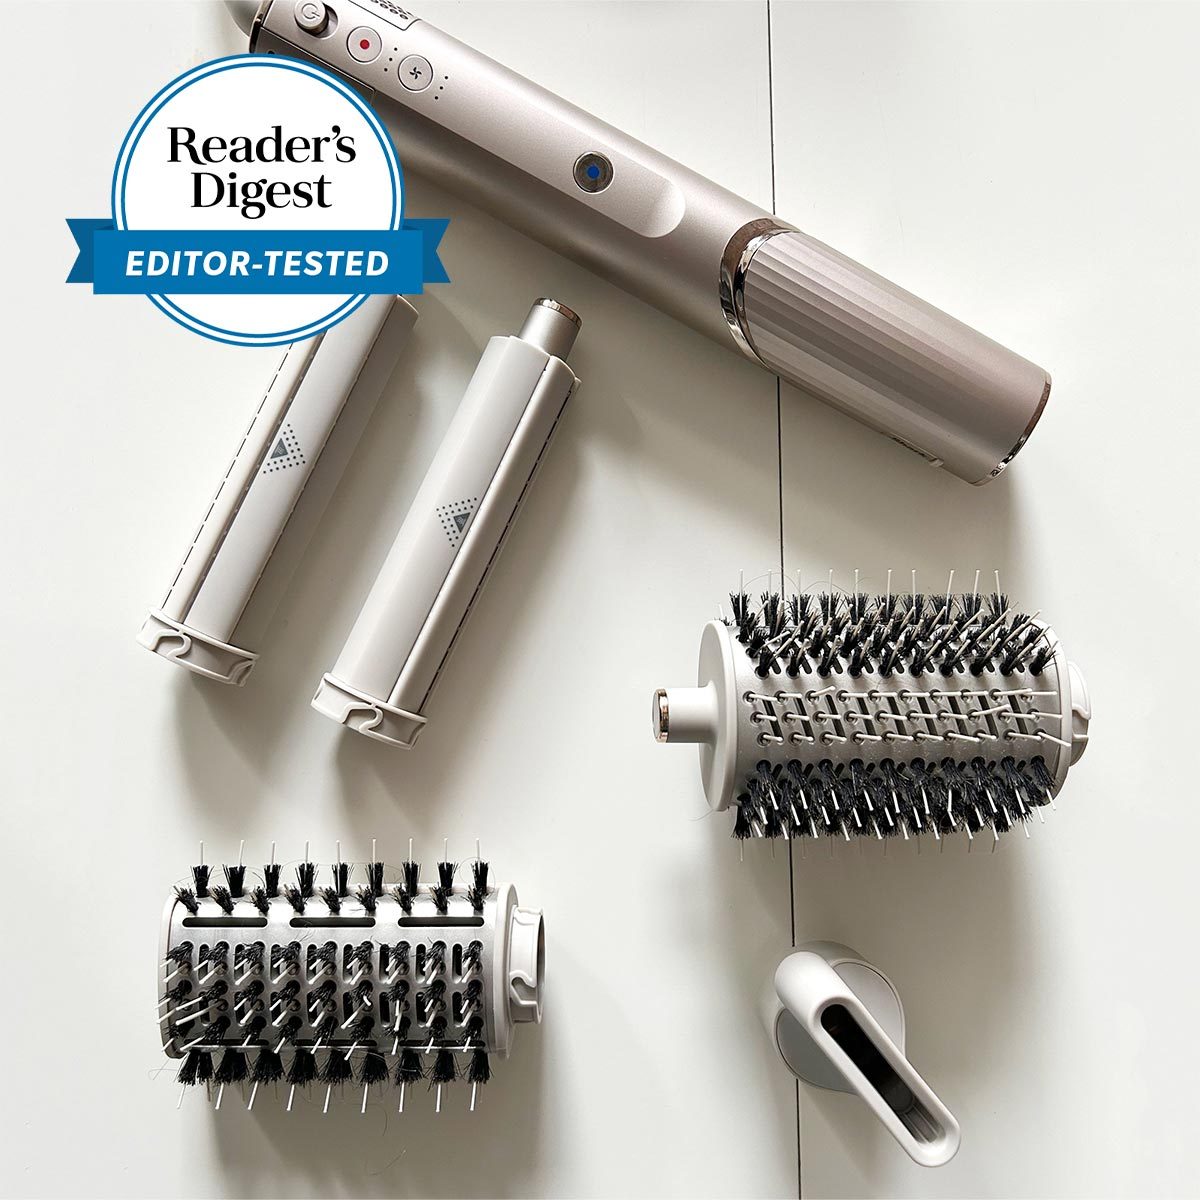 The Shark FlexStyle Hair Drying System Is Back in Stock on